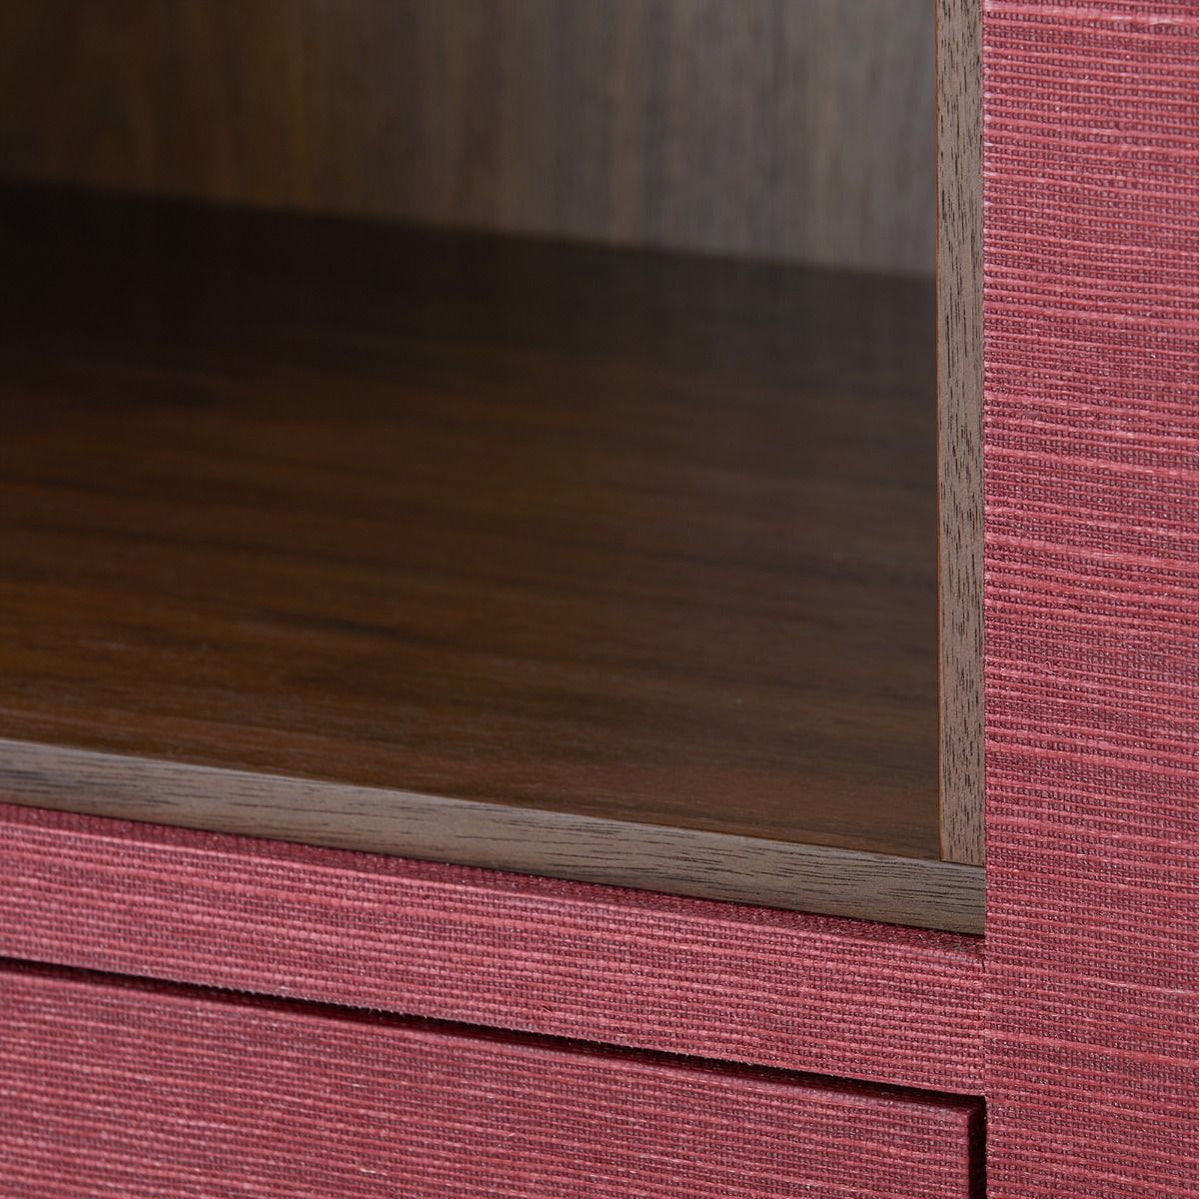 Villa &amp; House Ming 2-Drawer Side Table, Red